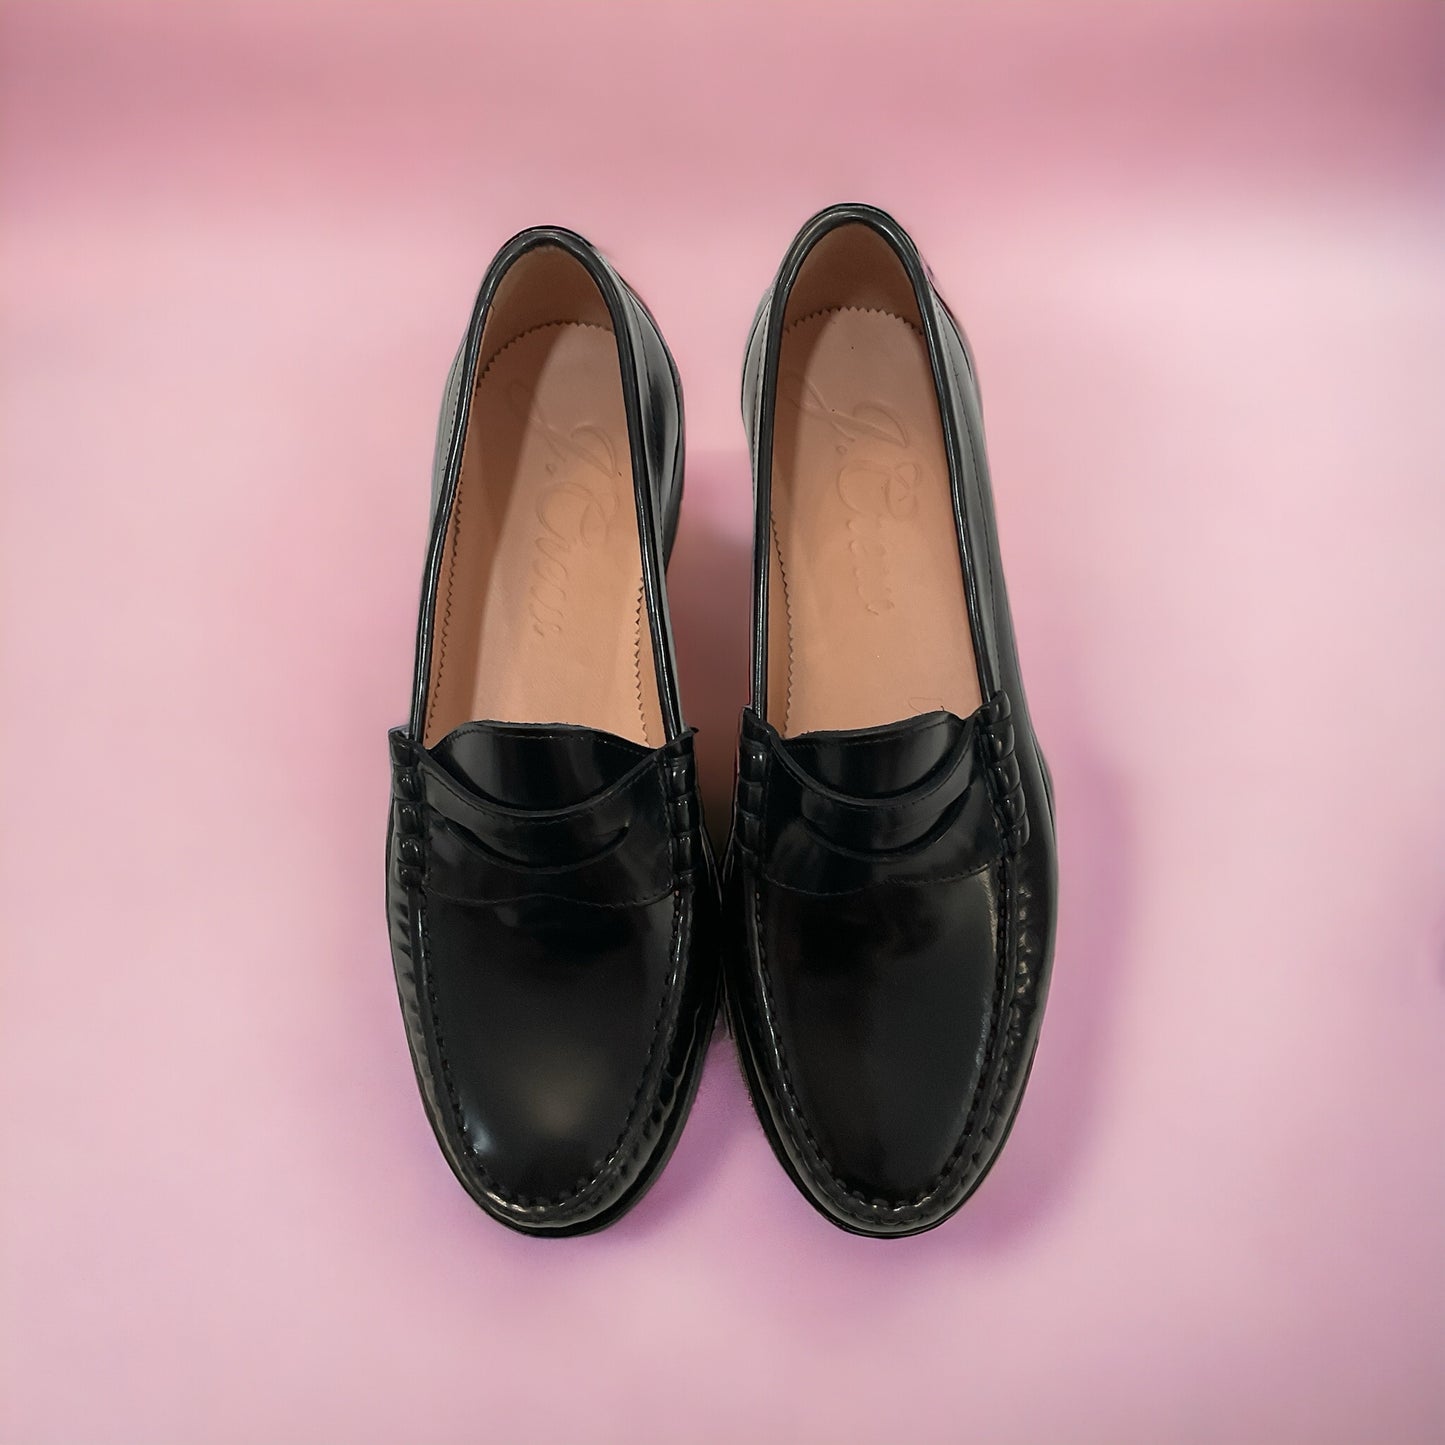 J. Crew Size 7.5 New Black Loafers